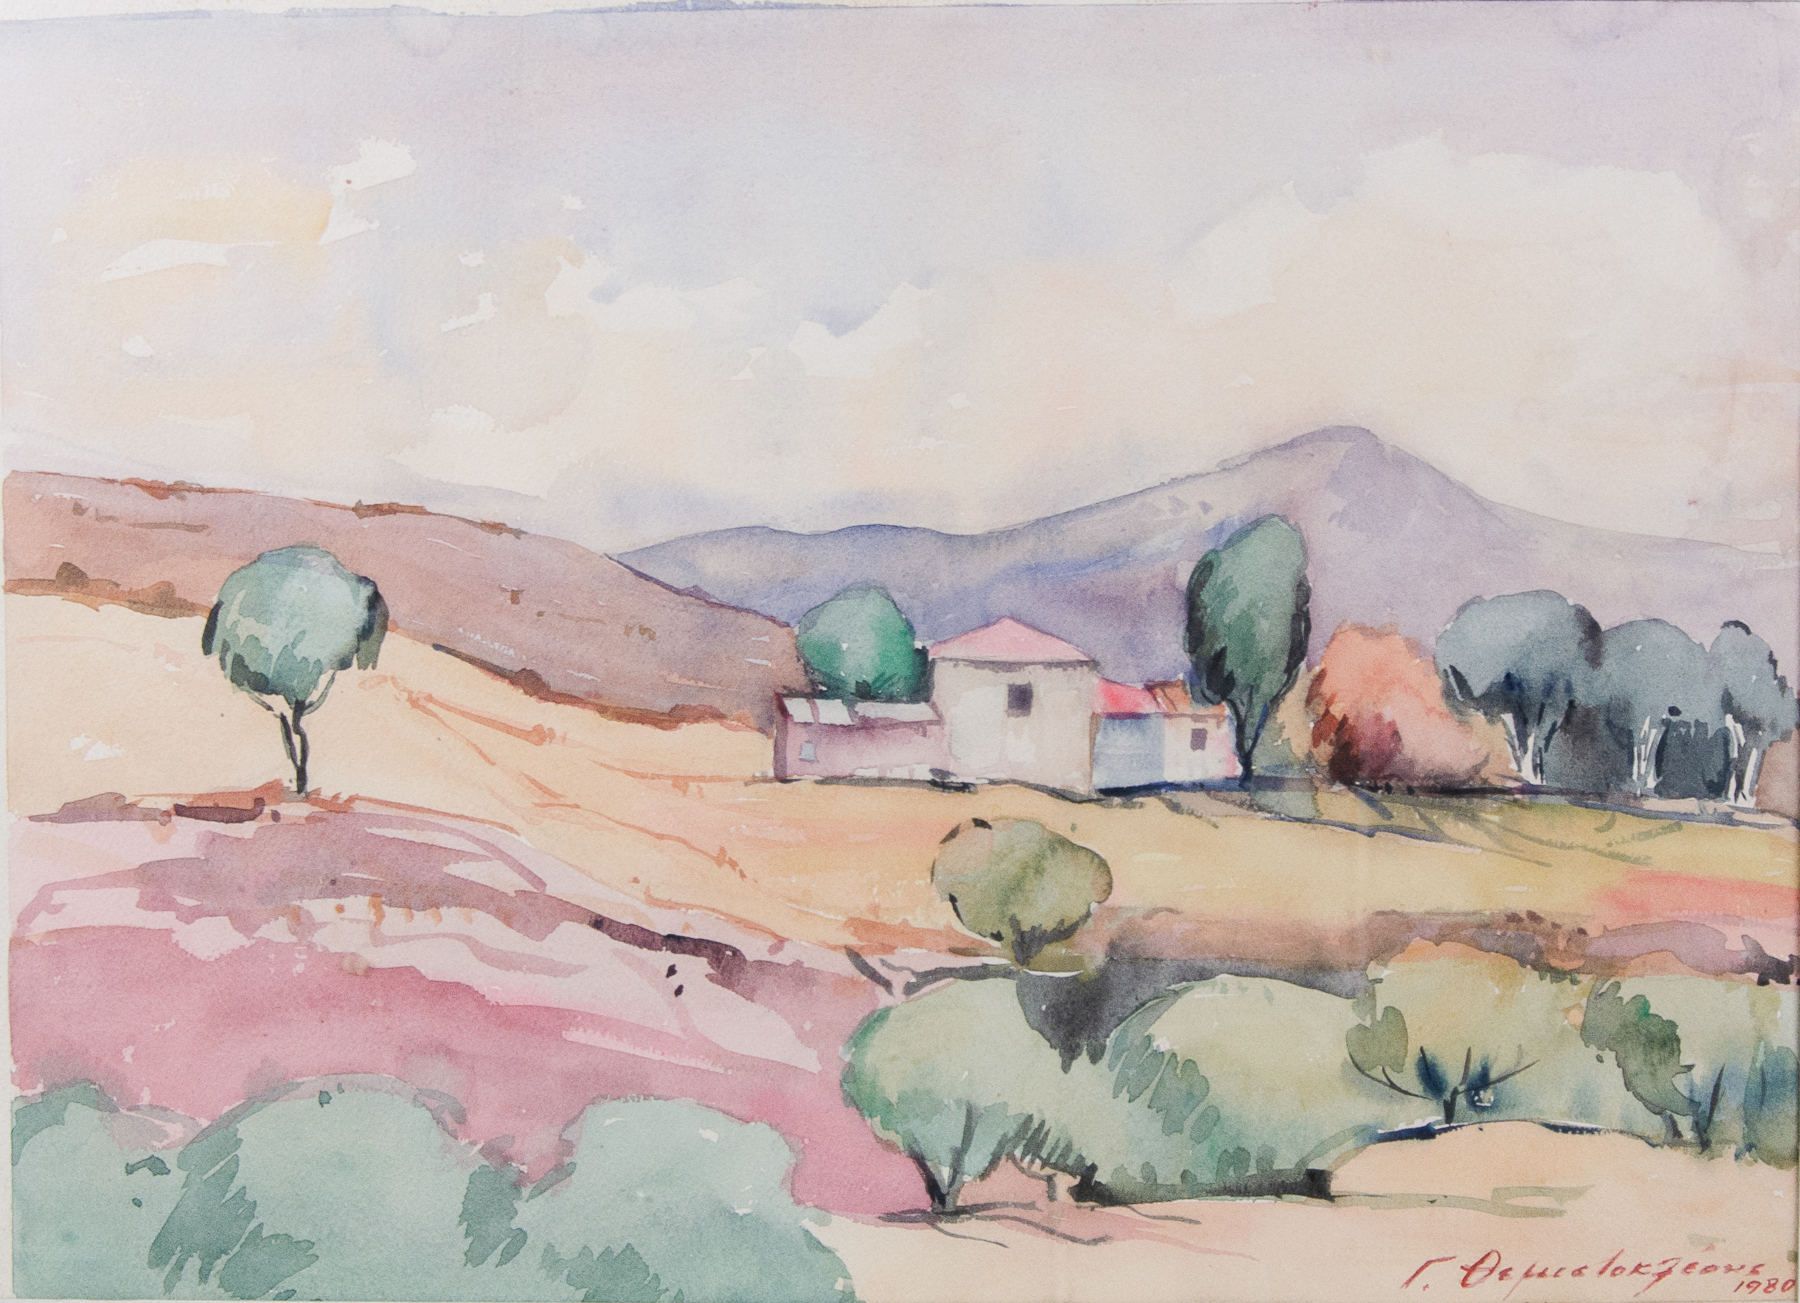 George THEMISTOCLEOUS (Cypriot) - Village scene 
George THEMISTOCLEOUS
Chypriote&hellip;